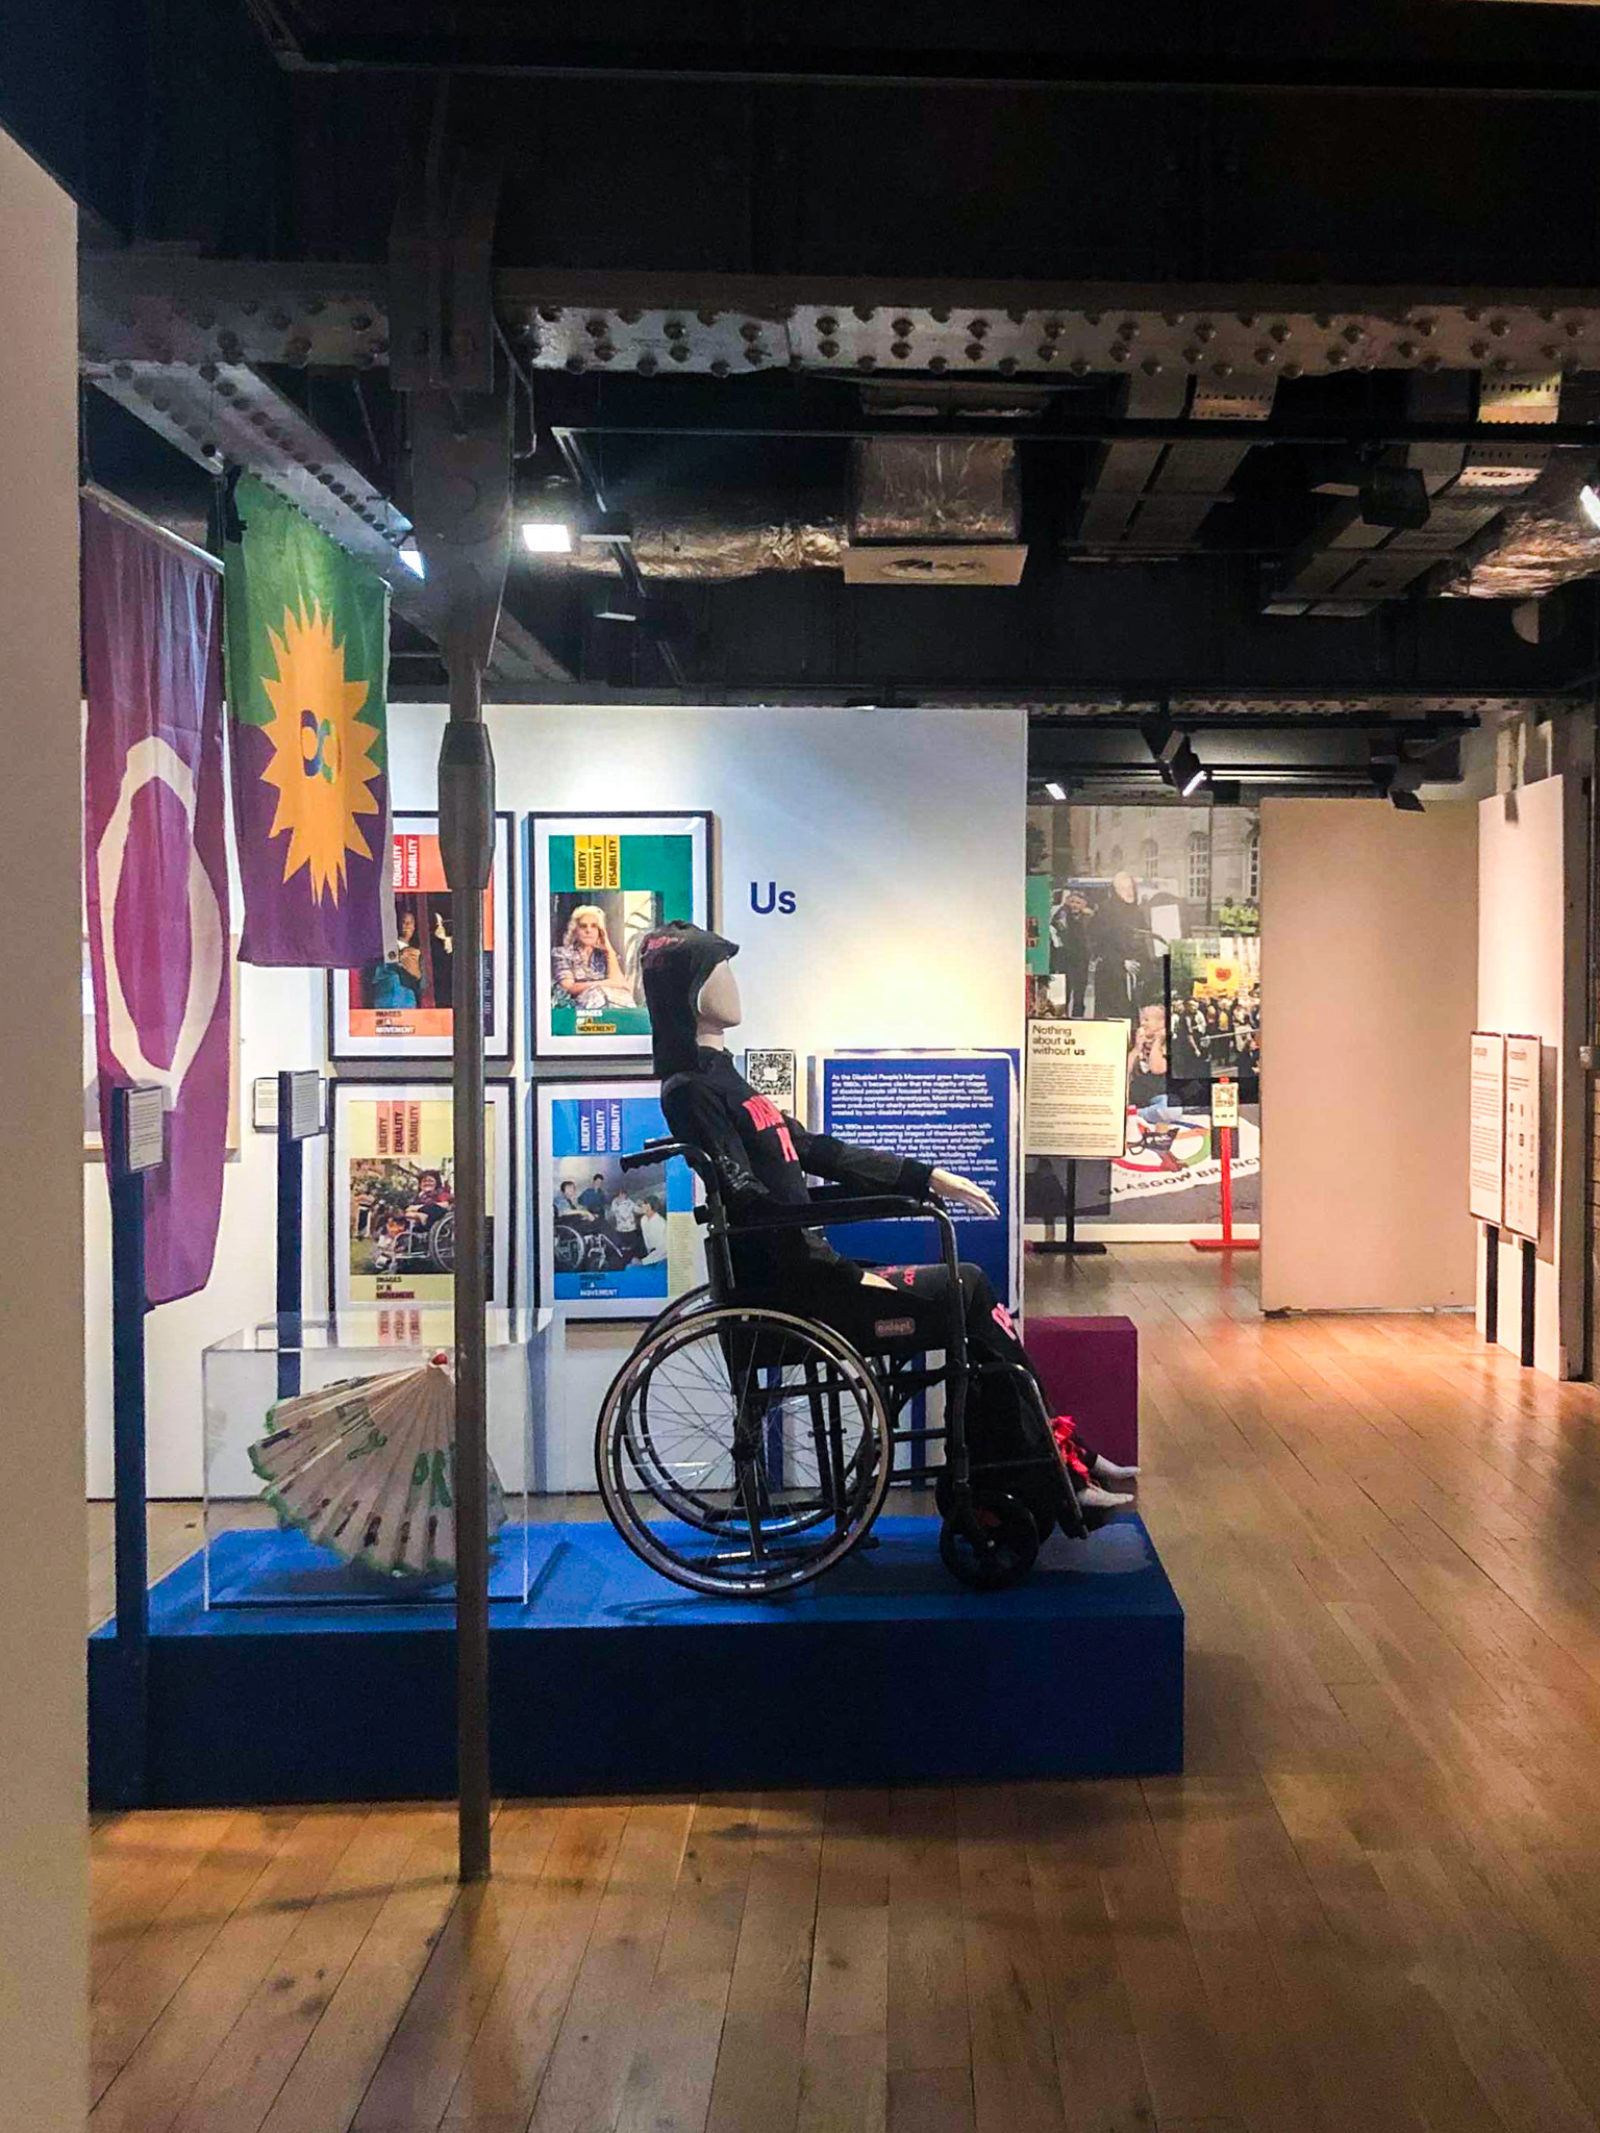 Photograph of the exhibition in people's history museum, features a mannequin in a wheelchair with flags and framed posters in the background.